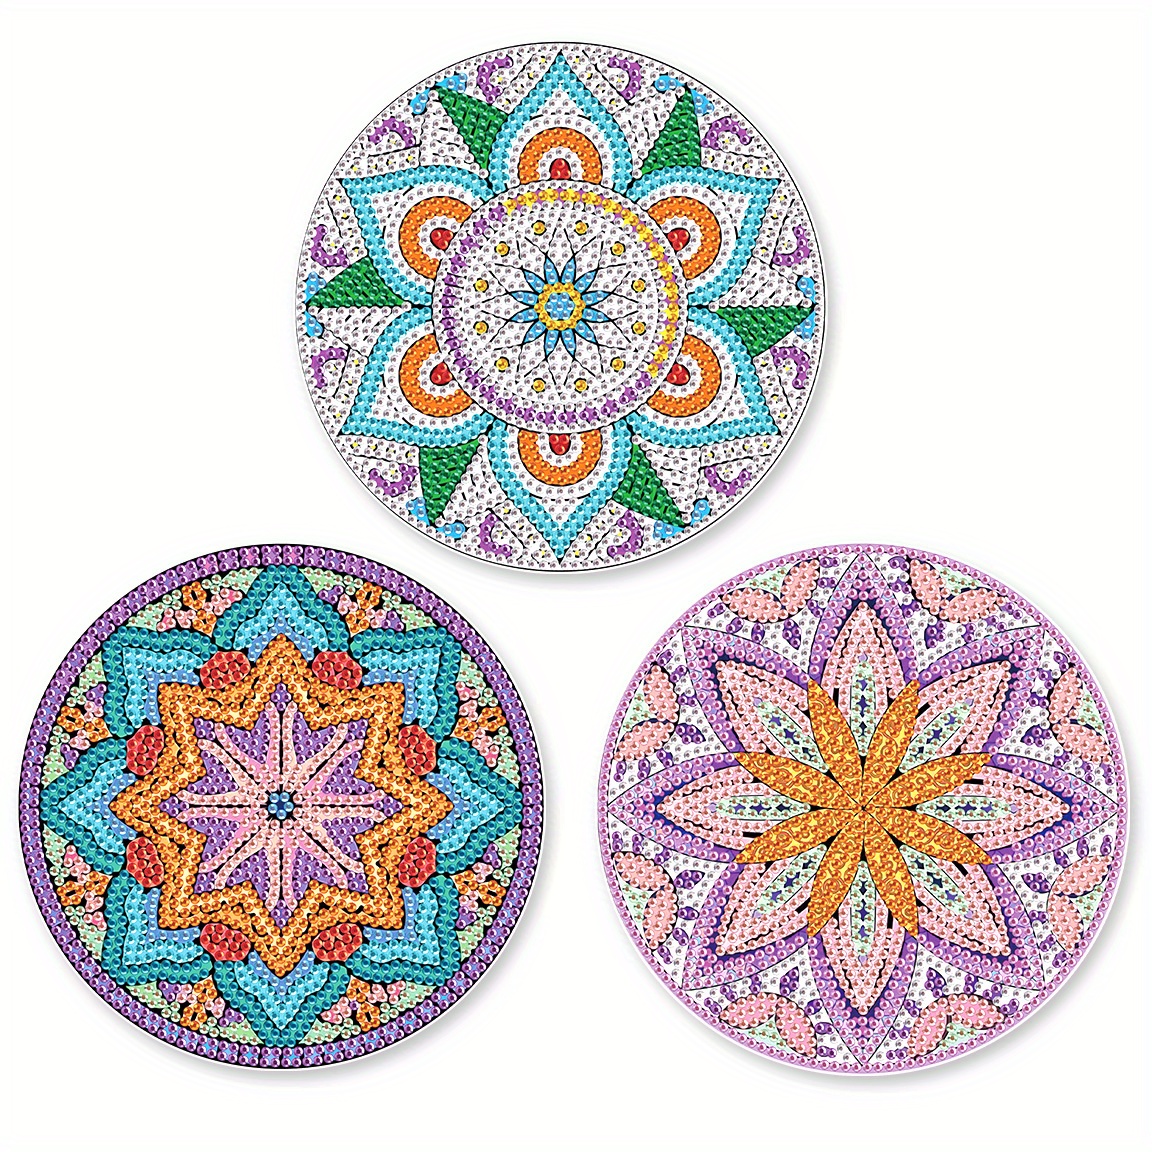 

3pcs Mandala Diamond Art Painting Placemats, Heat Resistant Non-slip Table Placemats, Indoor Kitchen Table Holiday Decorations, For Family Gatherings, New Year Gifts, Diamond Art Painting Kits